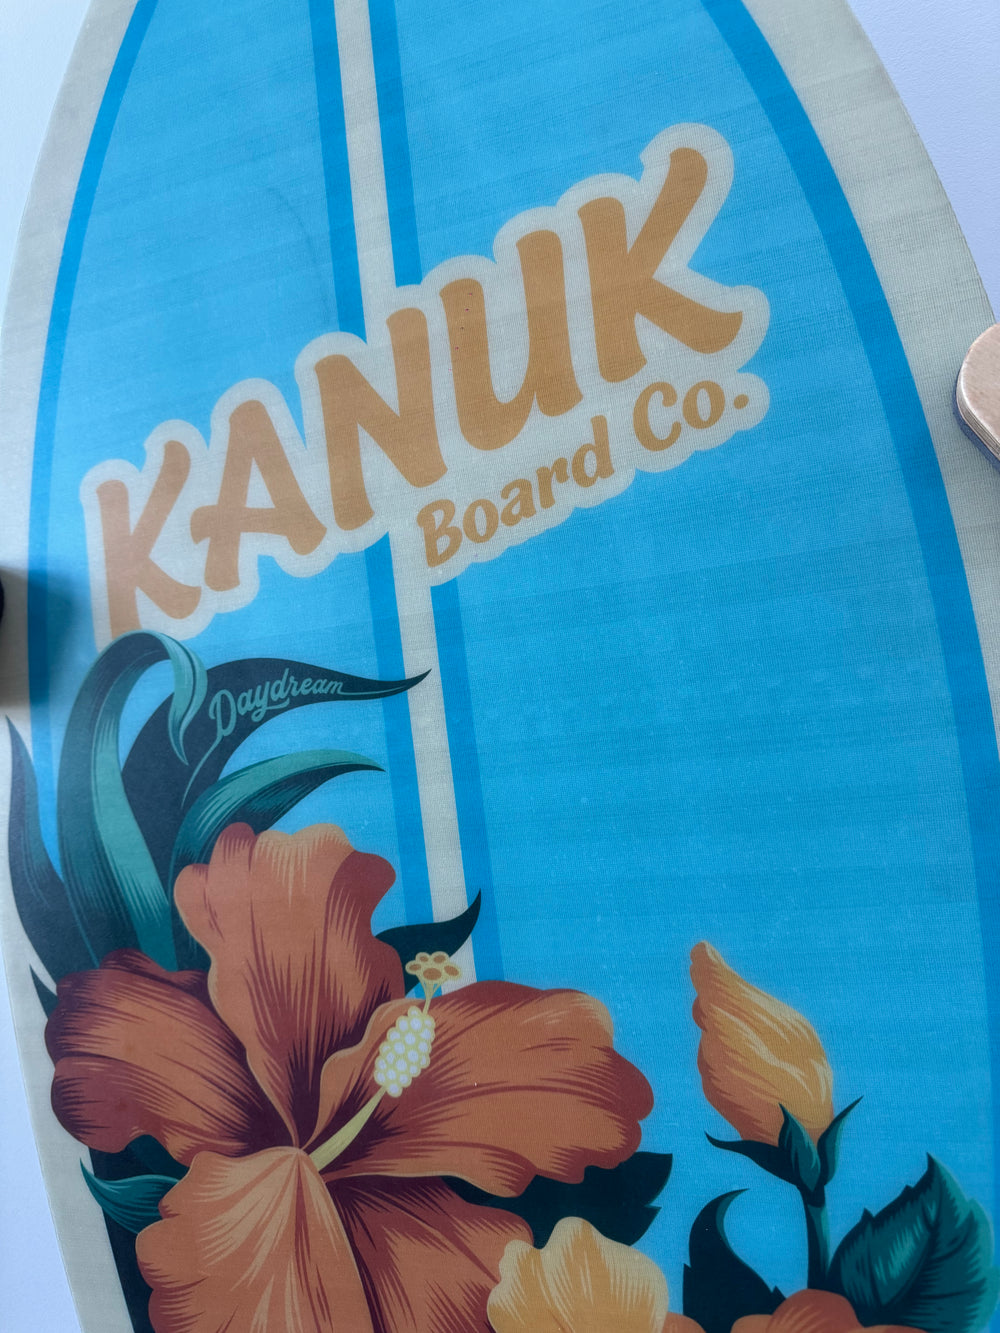 Demo and Blems 2024 – Kanuk Board Co